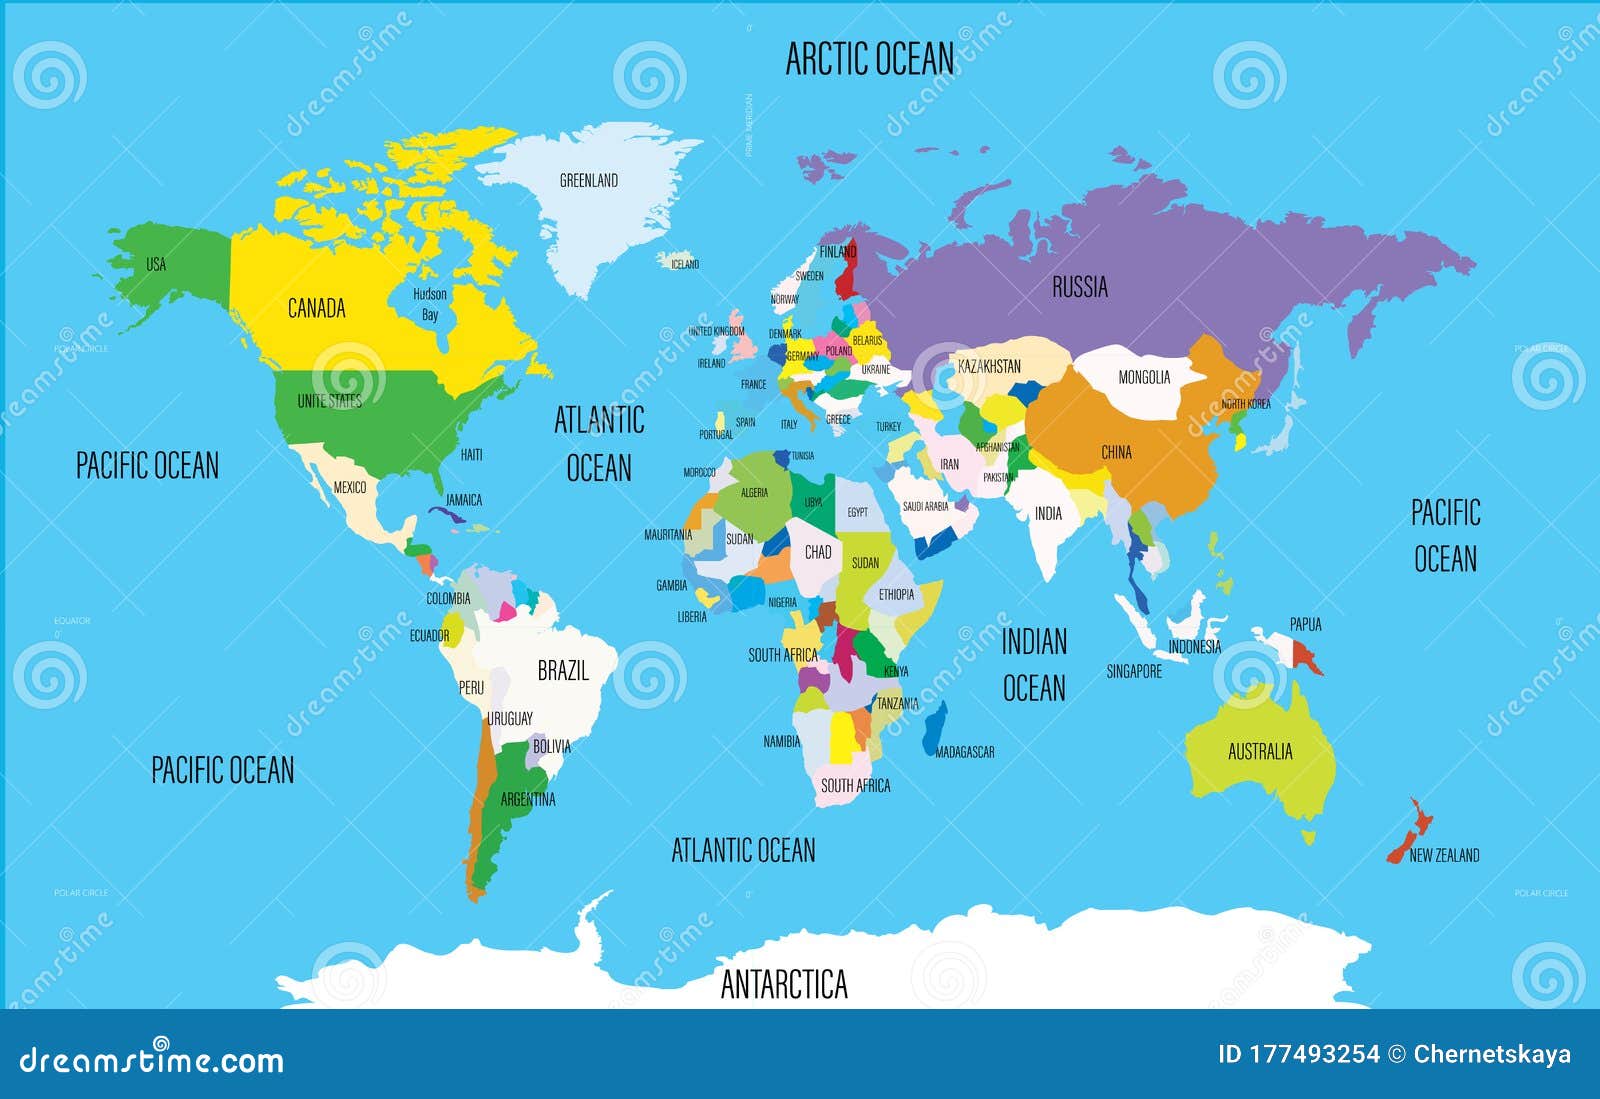 world map for travel agency